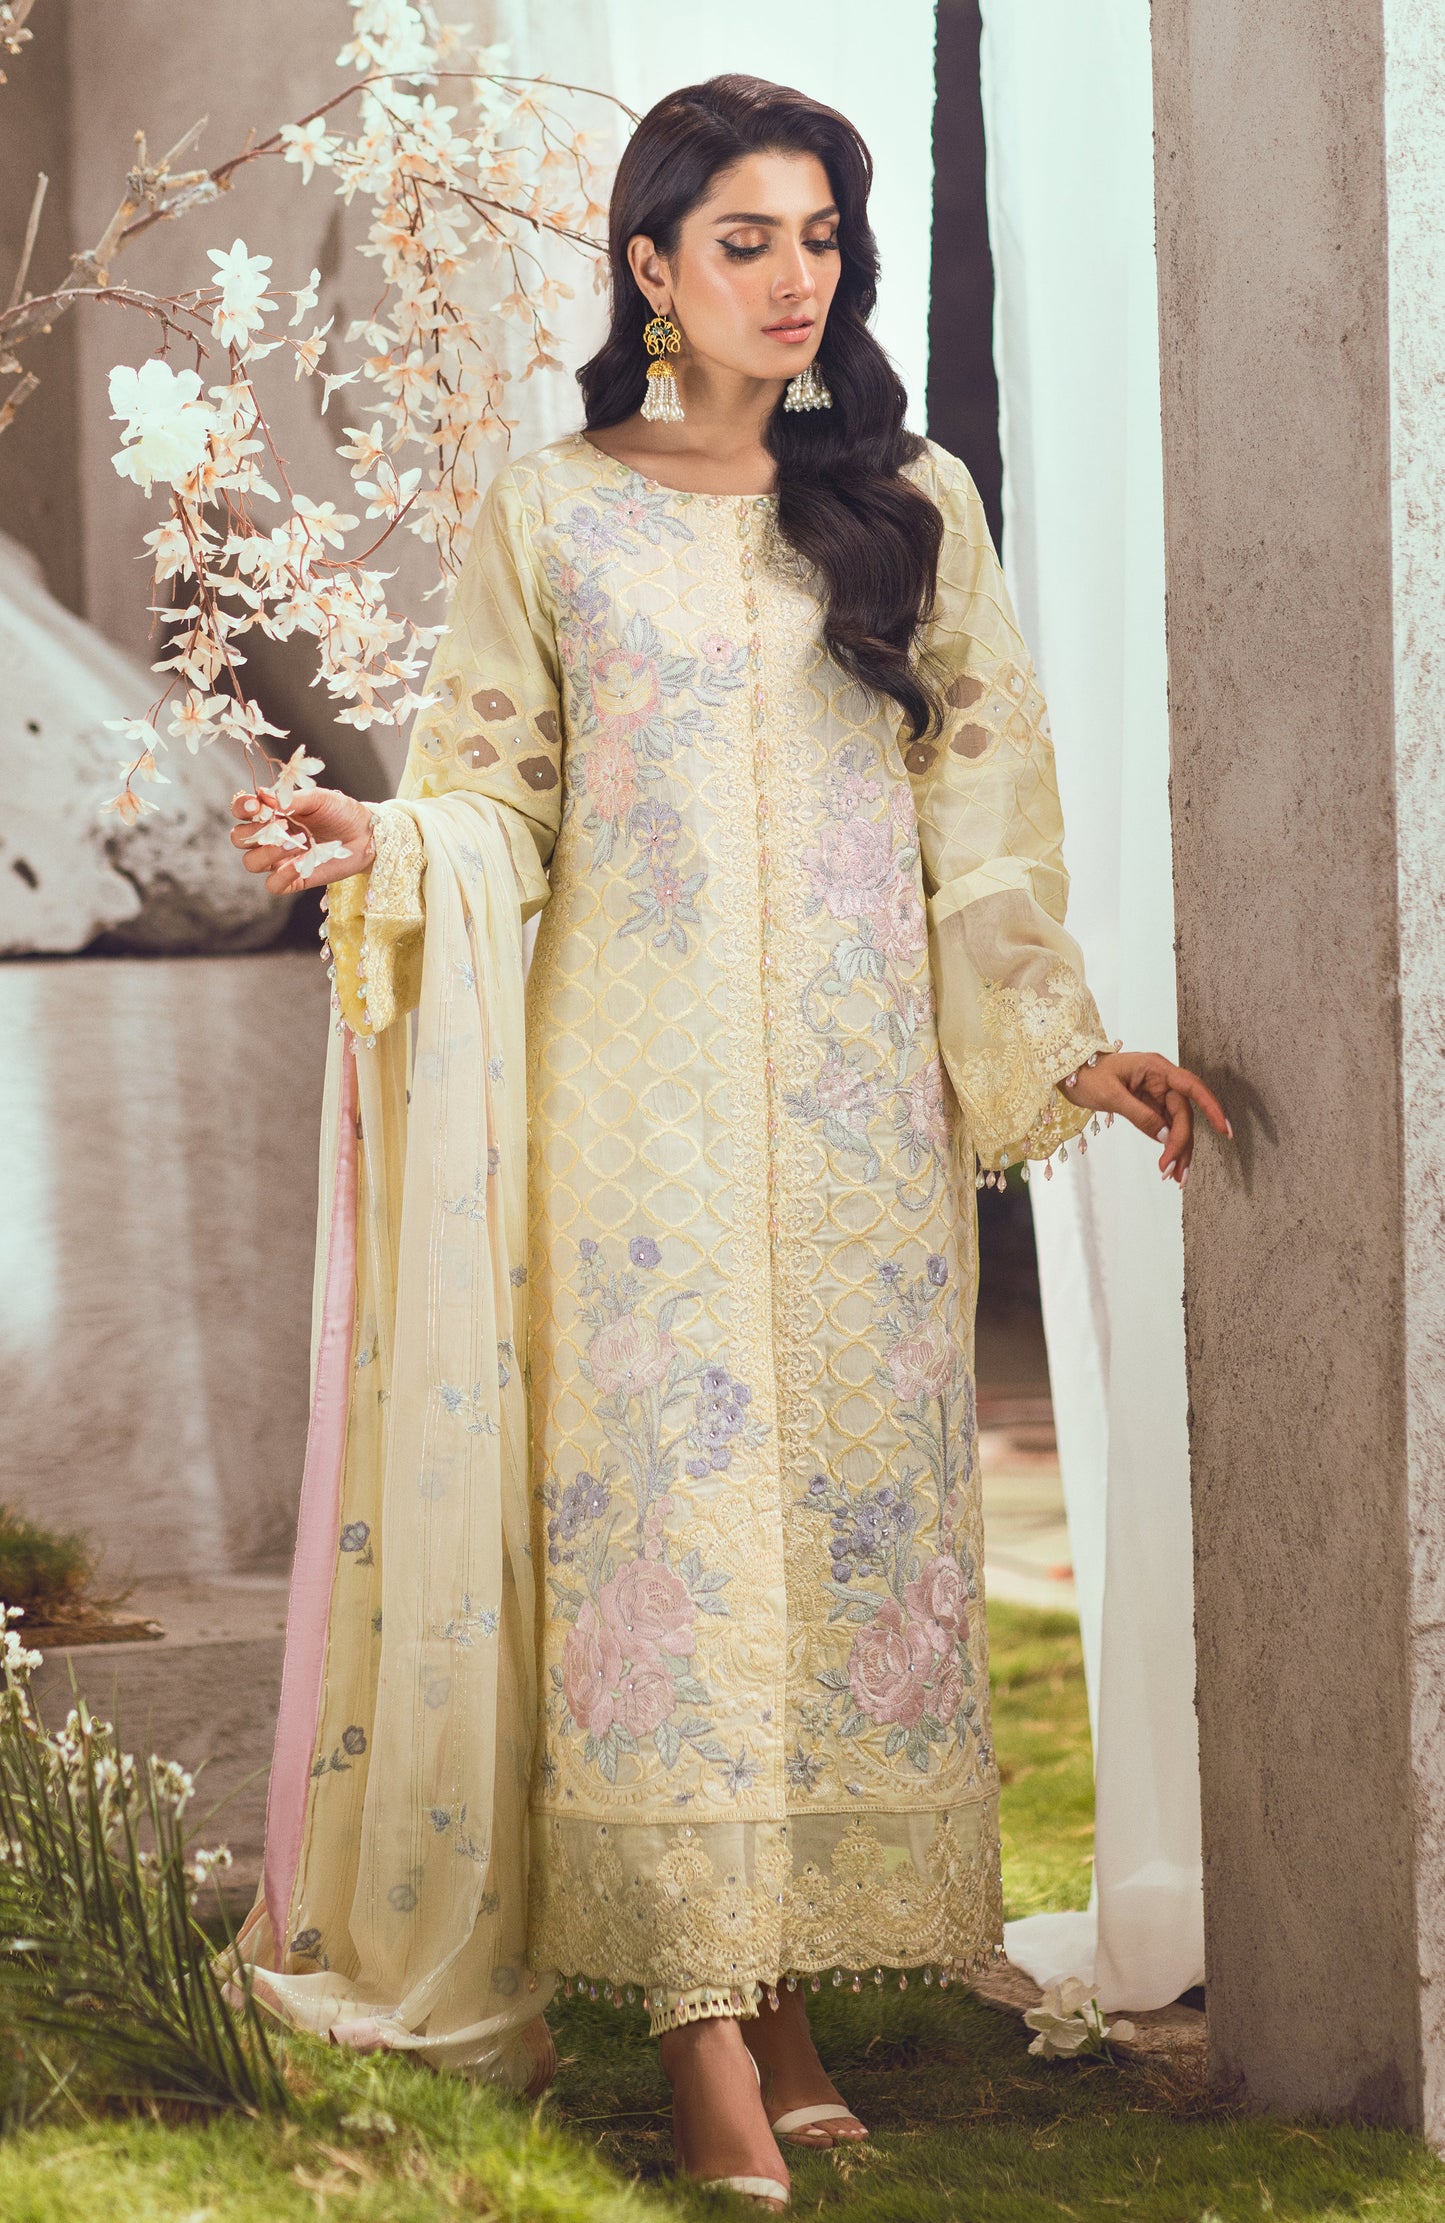 Buy Now, D#03 MAHIYMAAN - Eid Luxury Embroidered Lawn - Al Zohaib - Shahana Collection UK - Wedding and Bridal Party Dresses - Festive Eid 2023